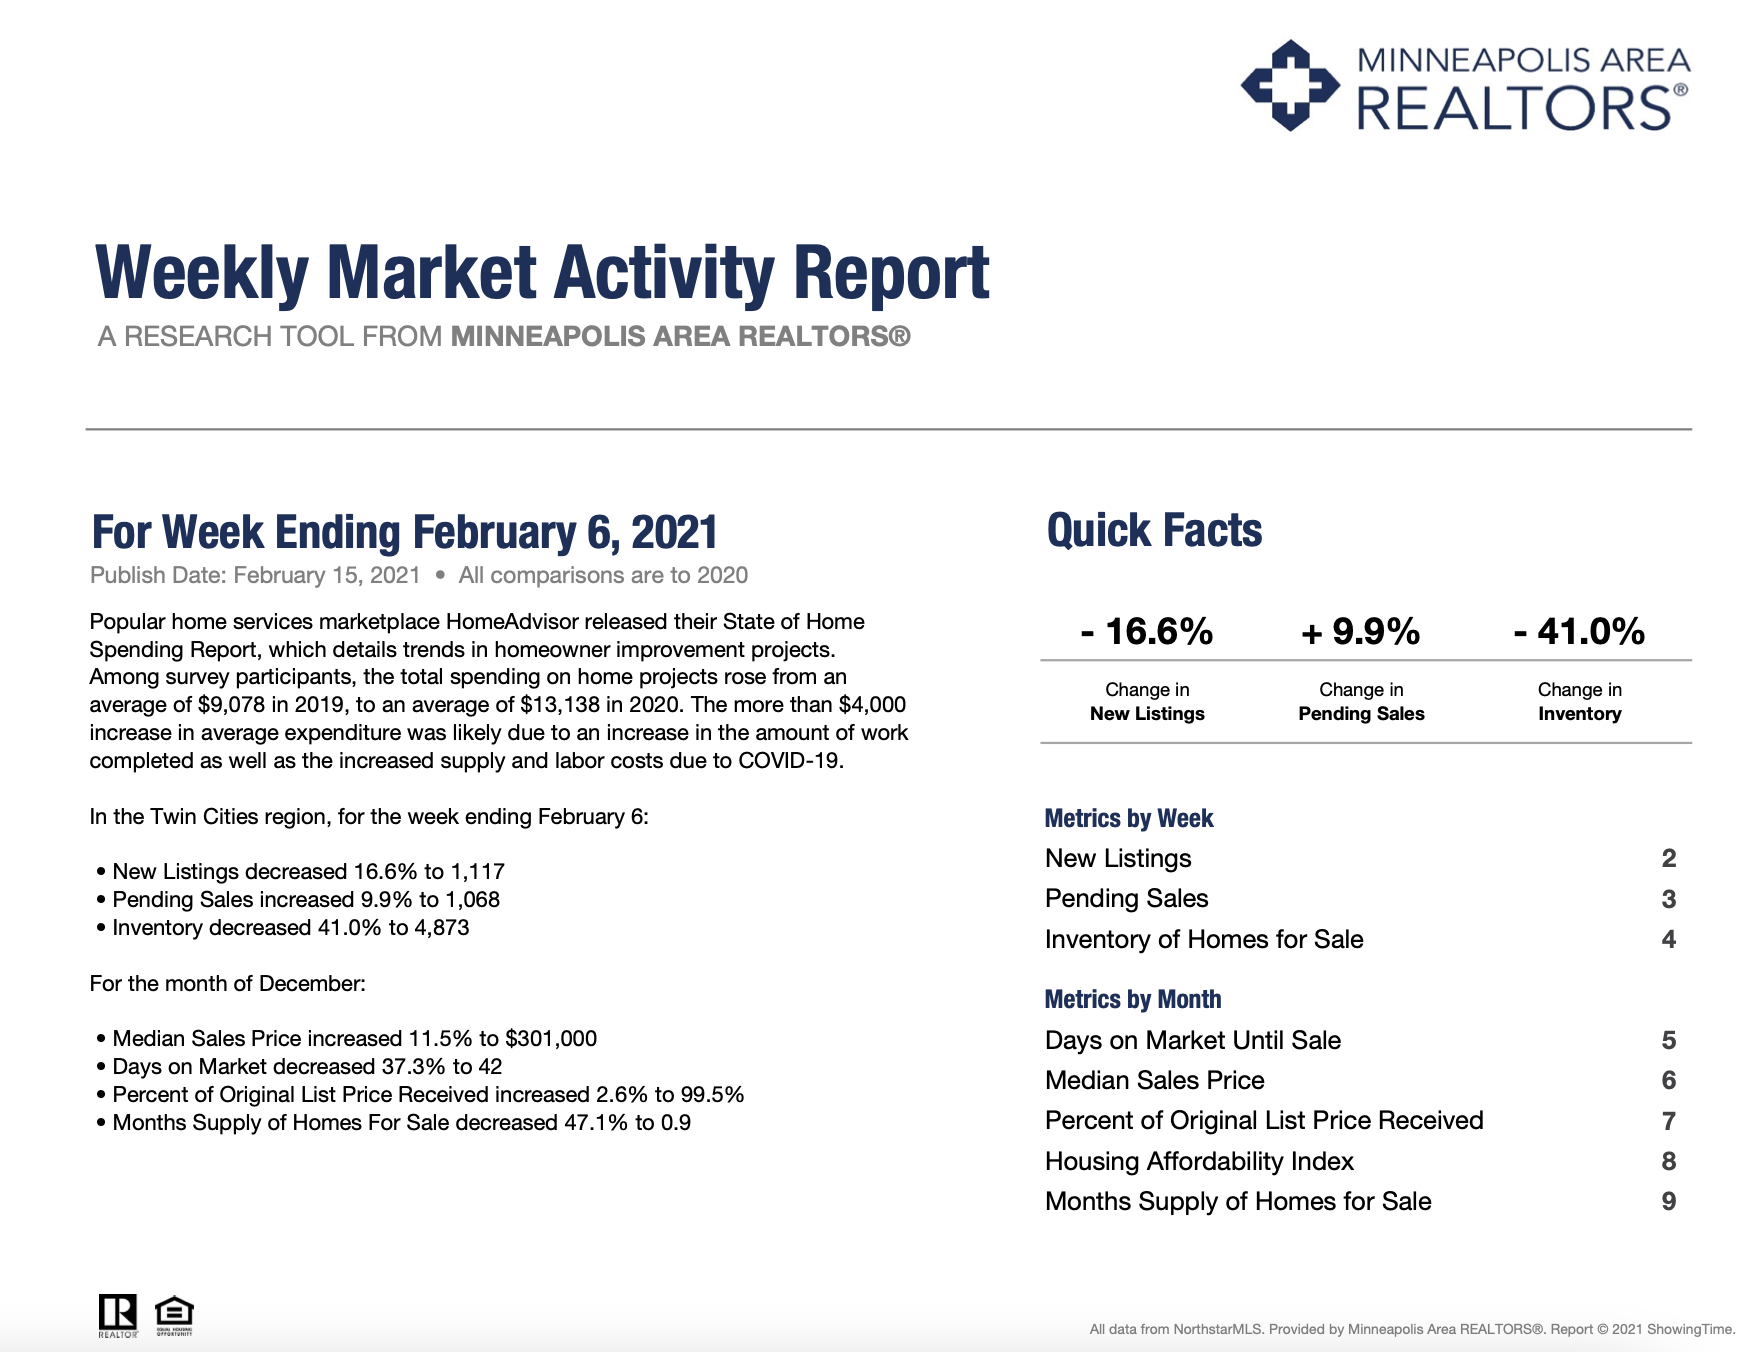 Your Weekly Market Activity Watch